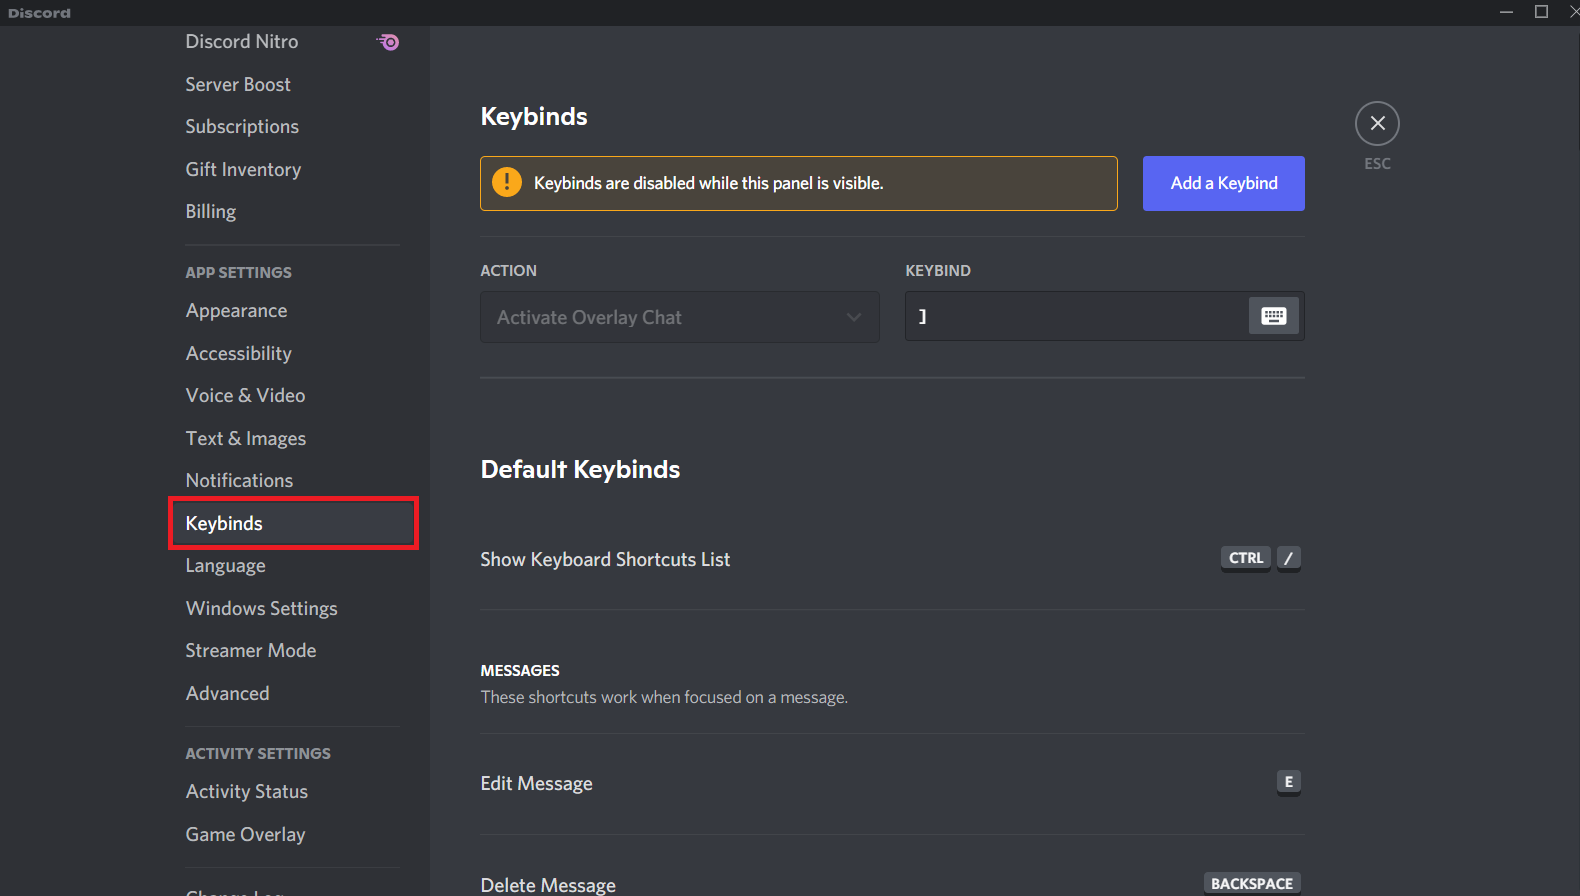 Go to Keybinds tab under APP SETTINGS in the left pane. How to Use Push to Talk on Discord